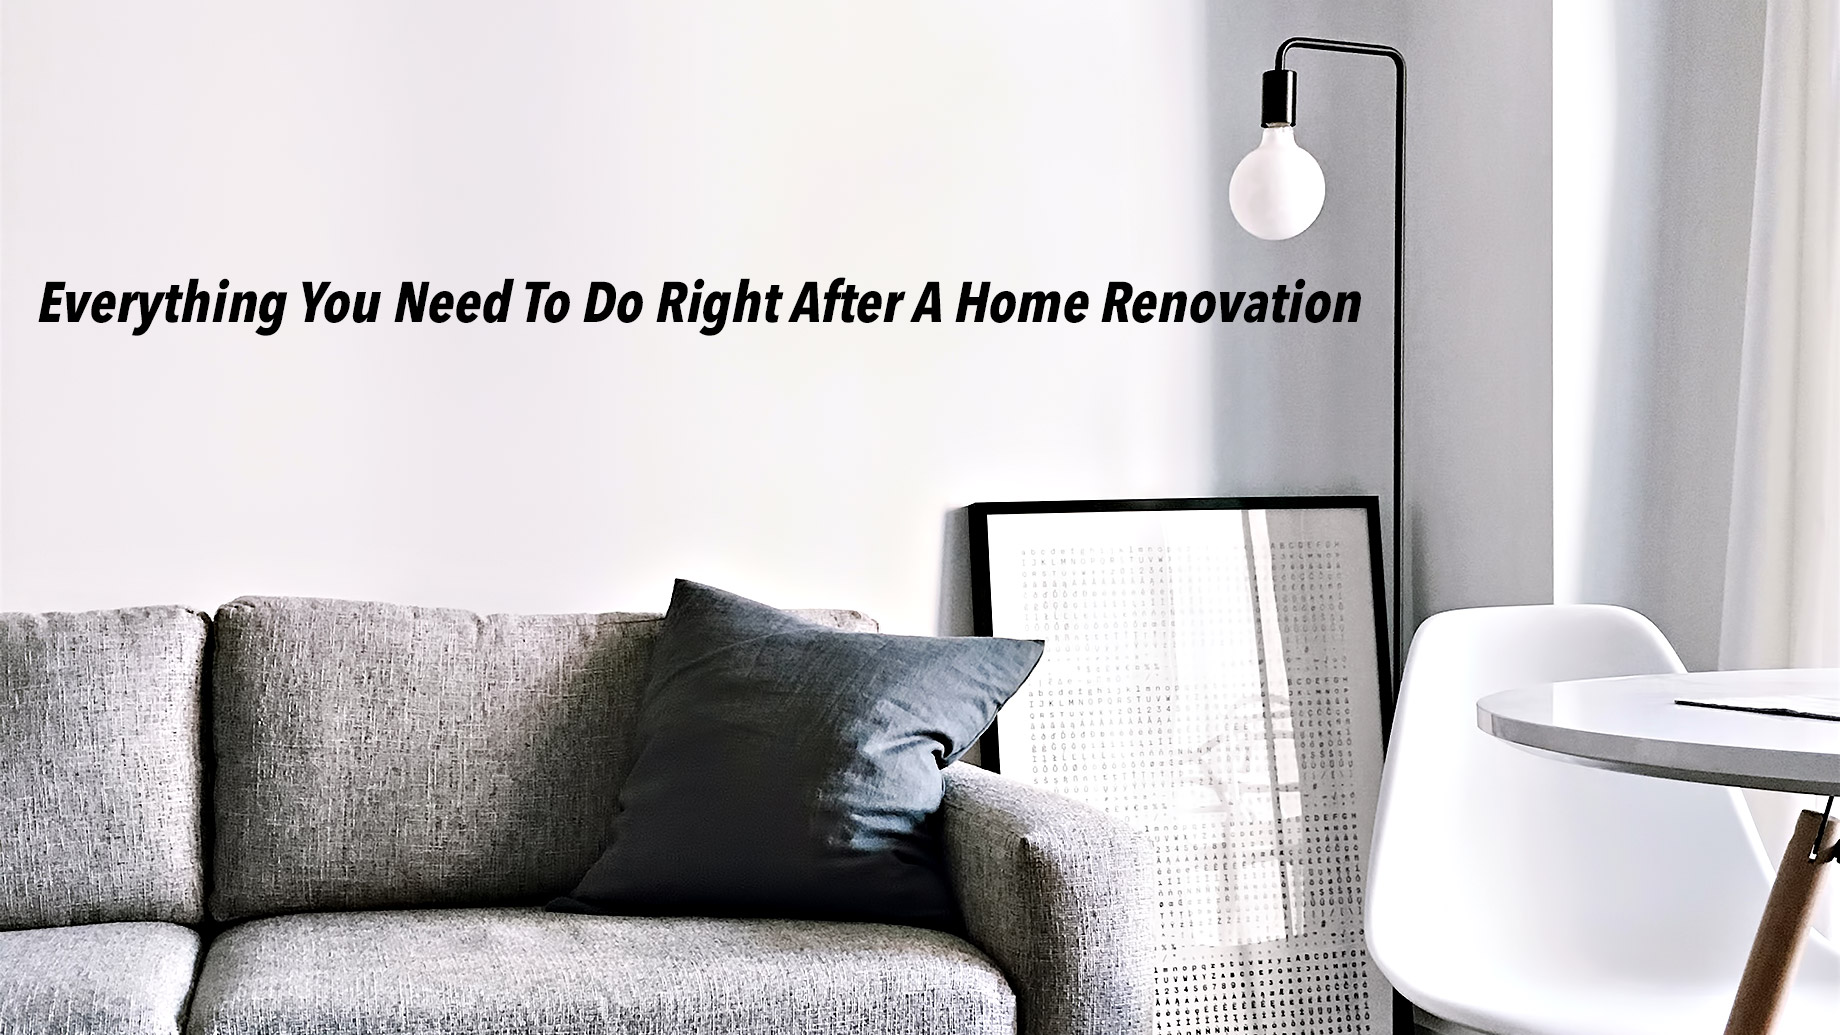 Everything You Need To Do Right After A Home Renovation